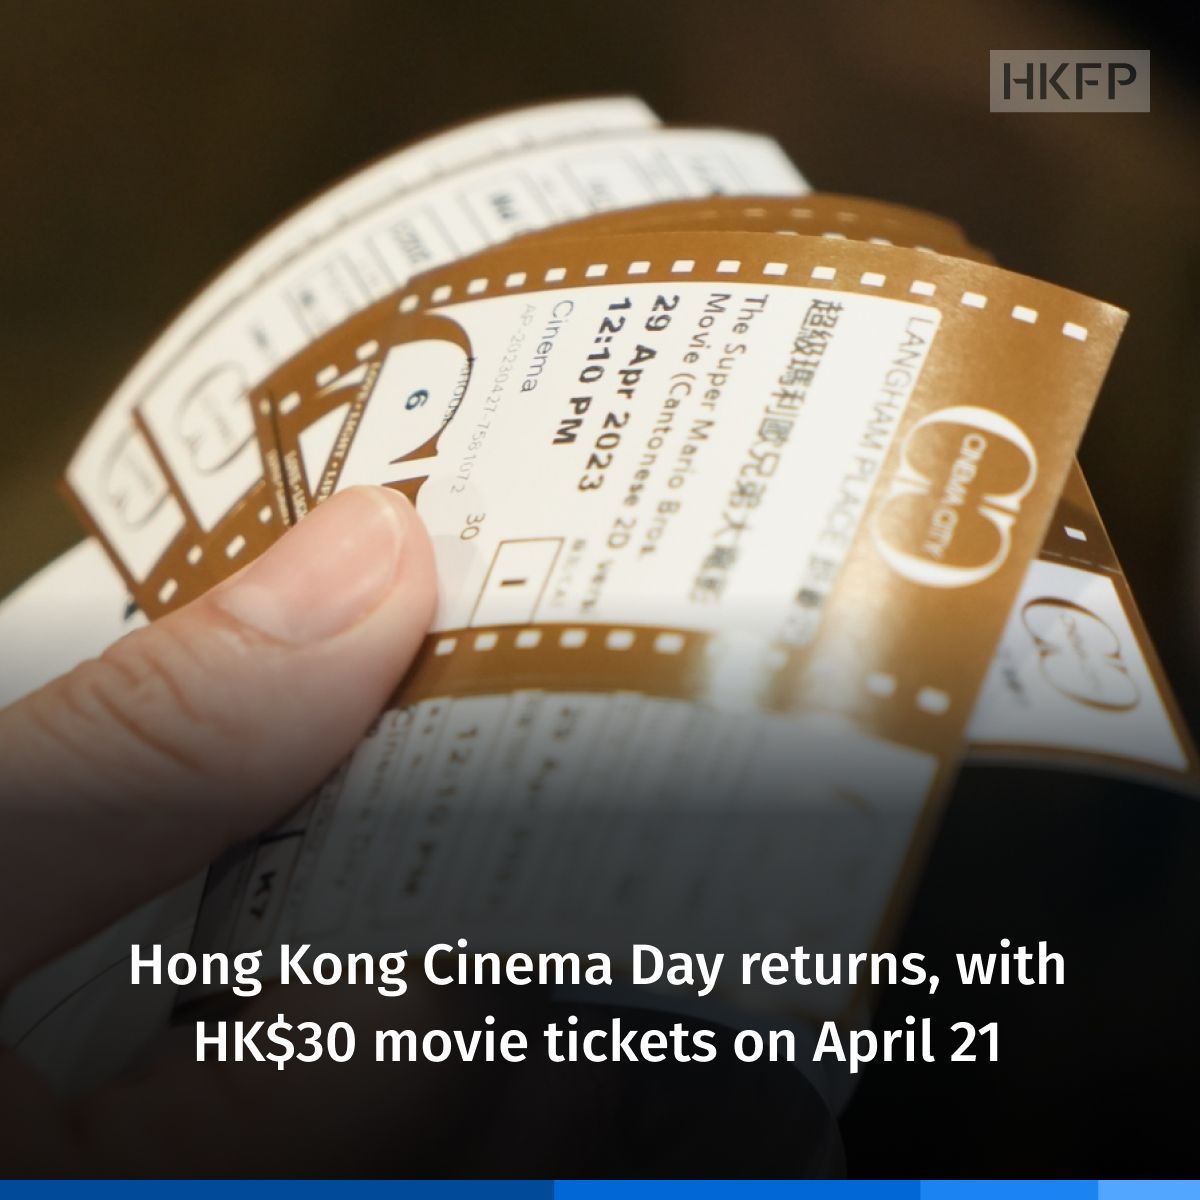 Hongkongers can enjoy HK$30 movie tickets at 63 participating cinemas on April 21, when the city's Cinema Day makes a return, the Hong Kong Theatres Association announced on Wednesday. File photo: Lea Mok/HKFP.